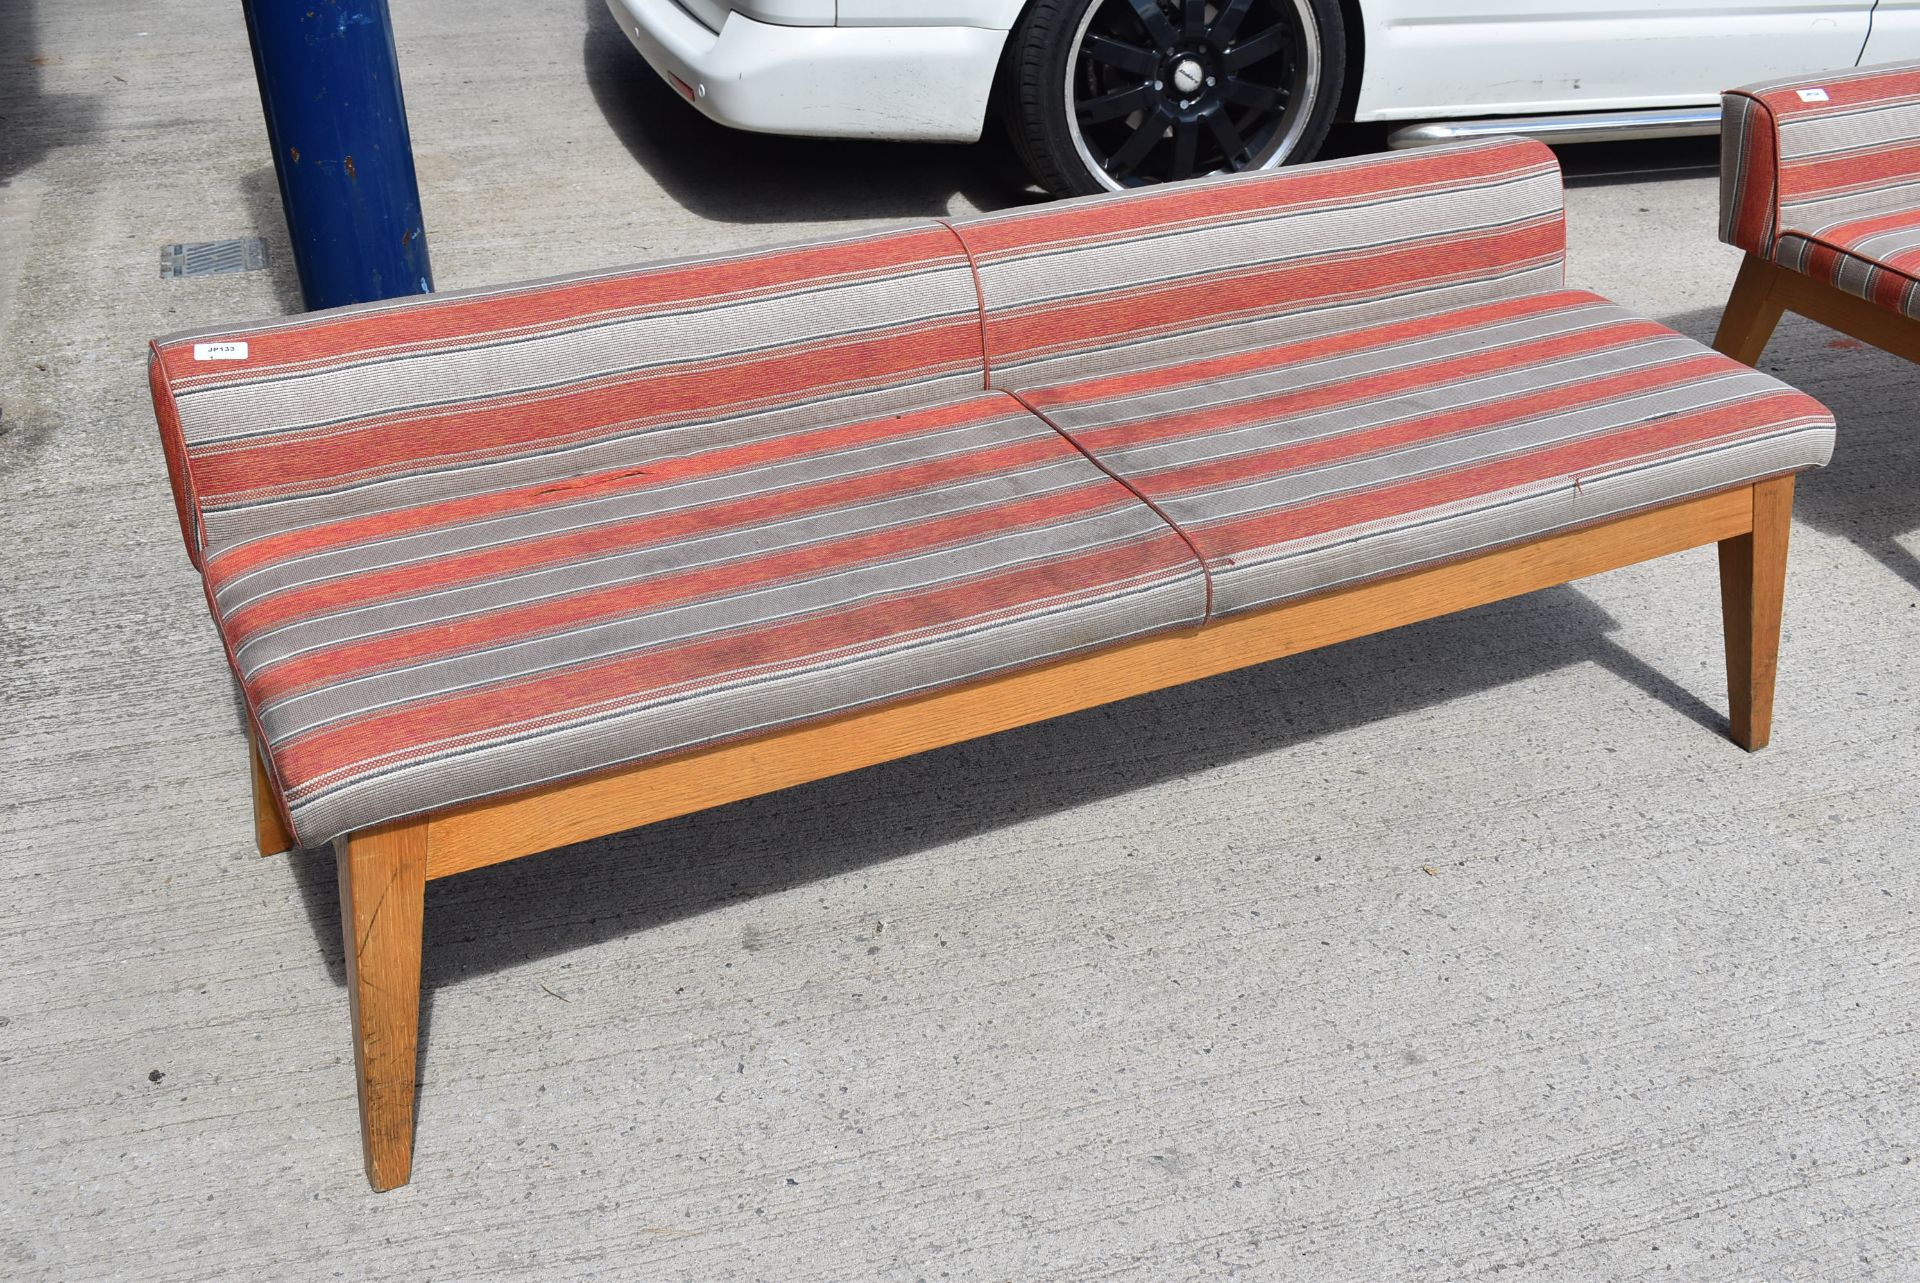 1 x Seating Bench With Solid Wood Bases and Hard Wearing Fabric Seats - Dimensions: H x W x D - Image 2 of 7